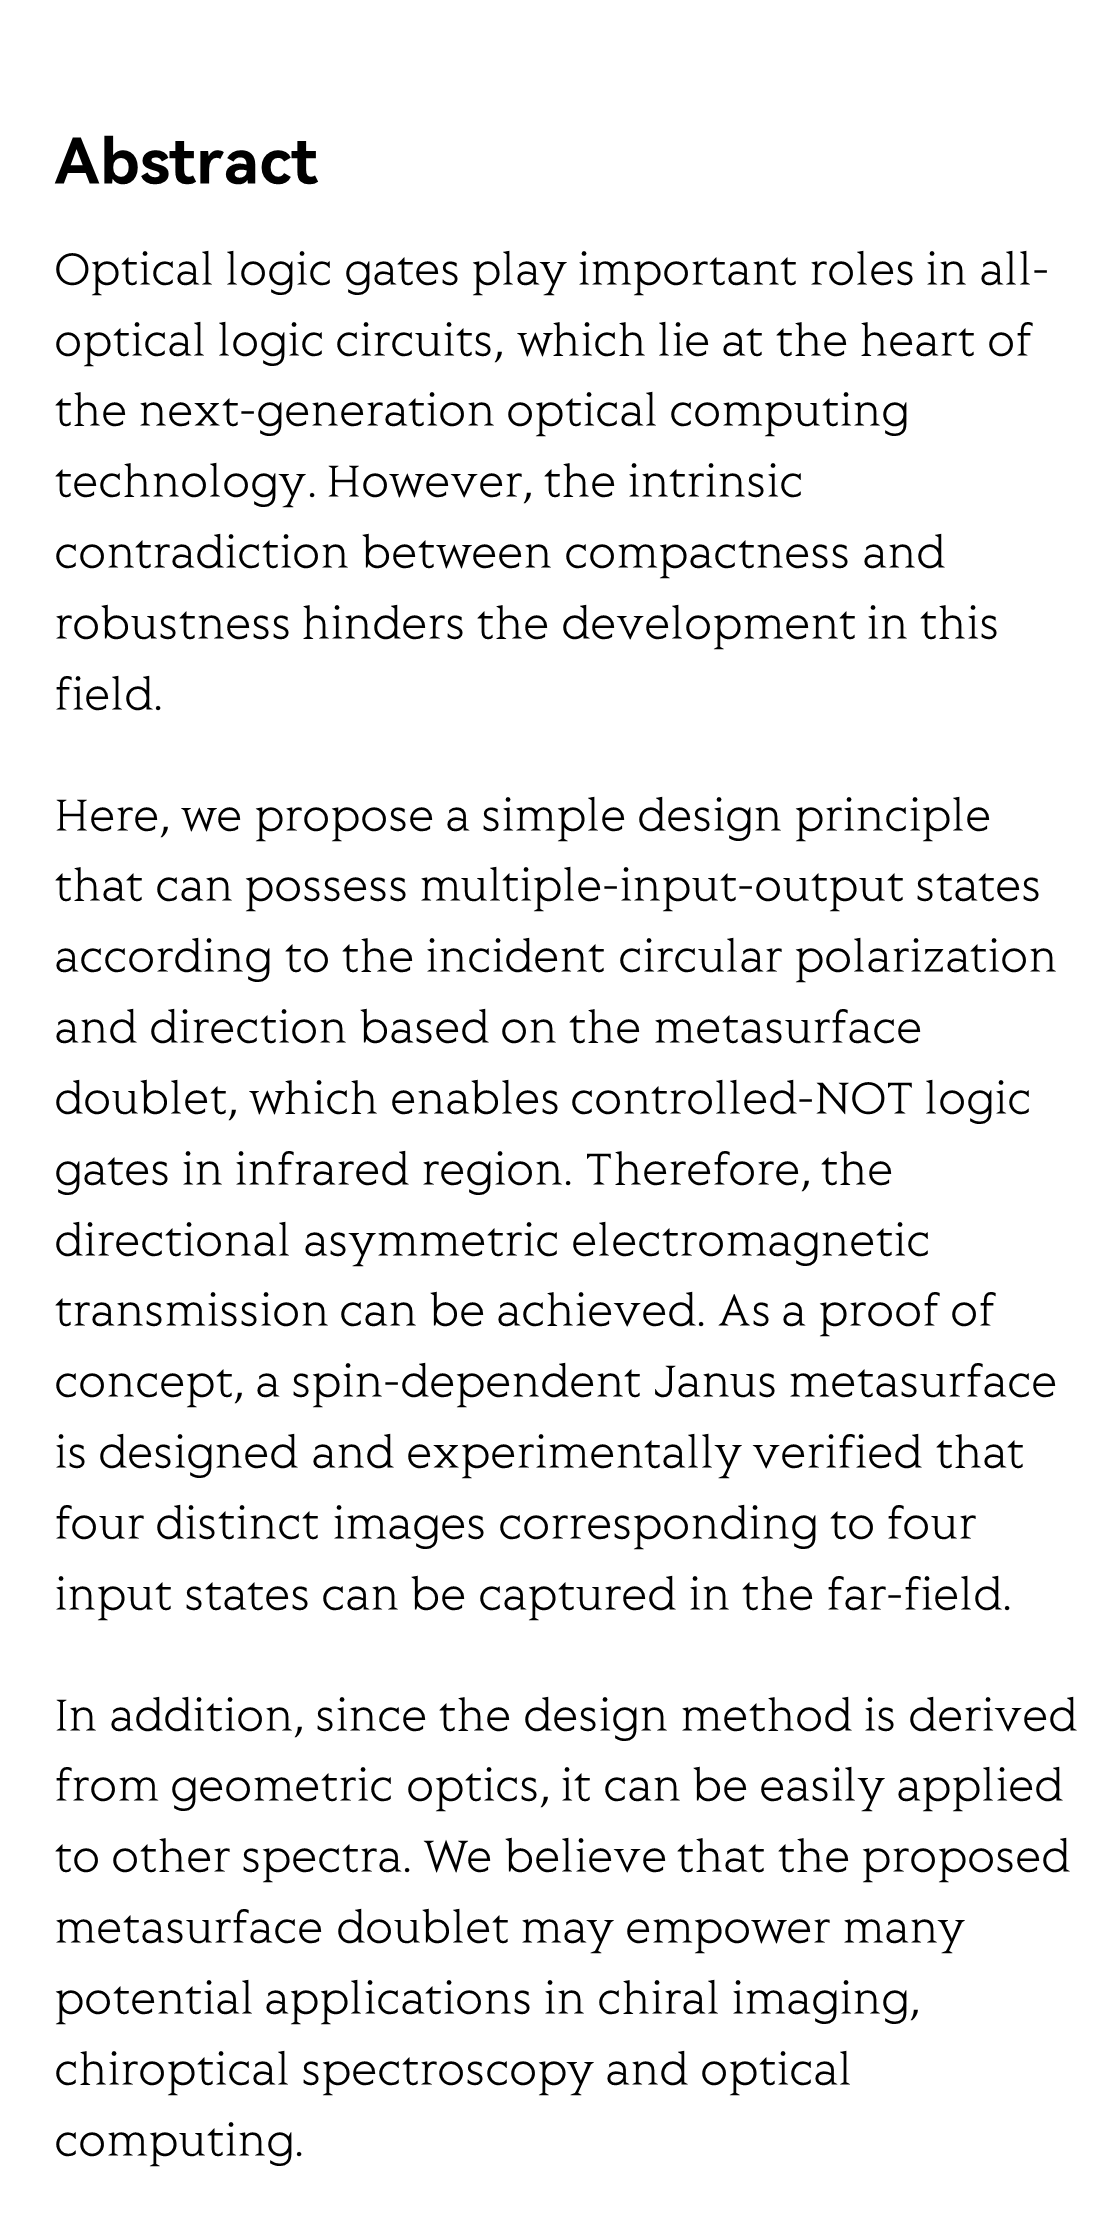 All-optical controlled-NOT logic gate achieving directional asymmetric transmission based on metasurface doublet_2